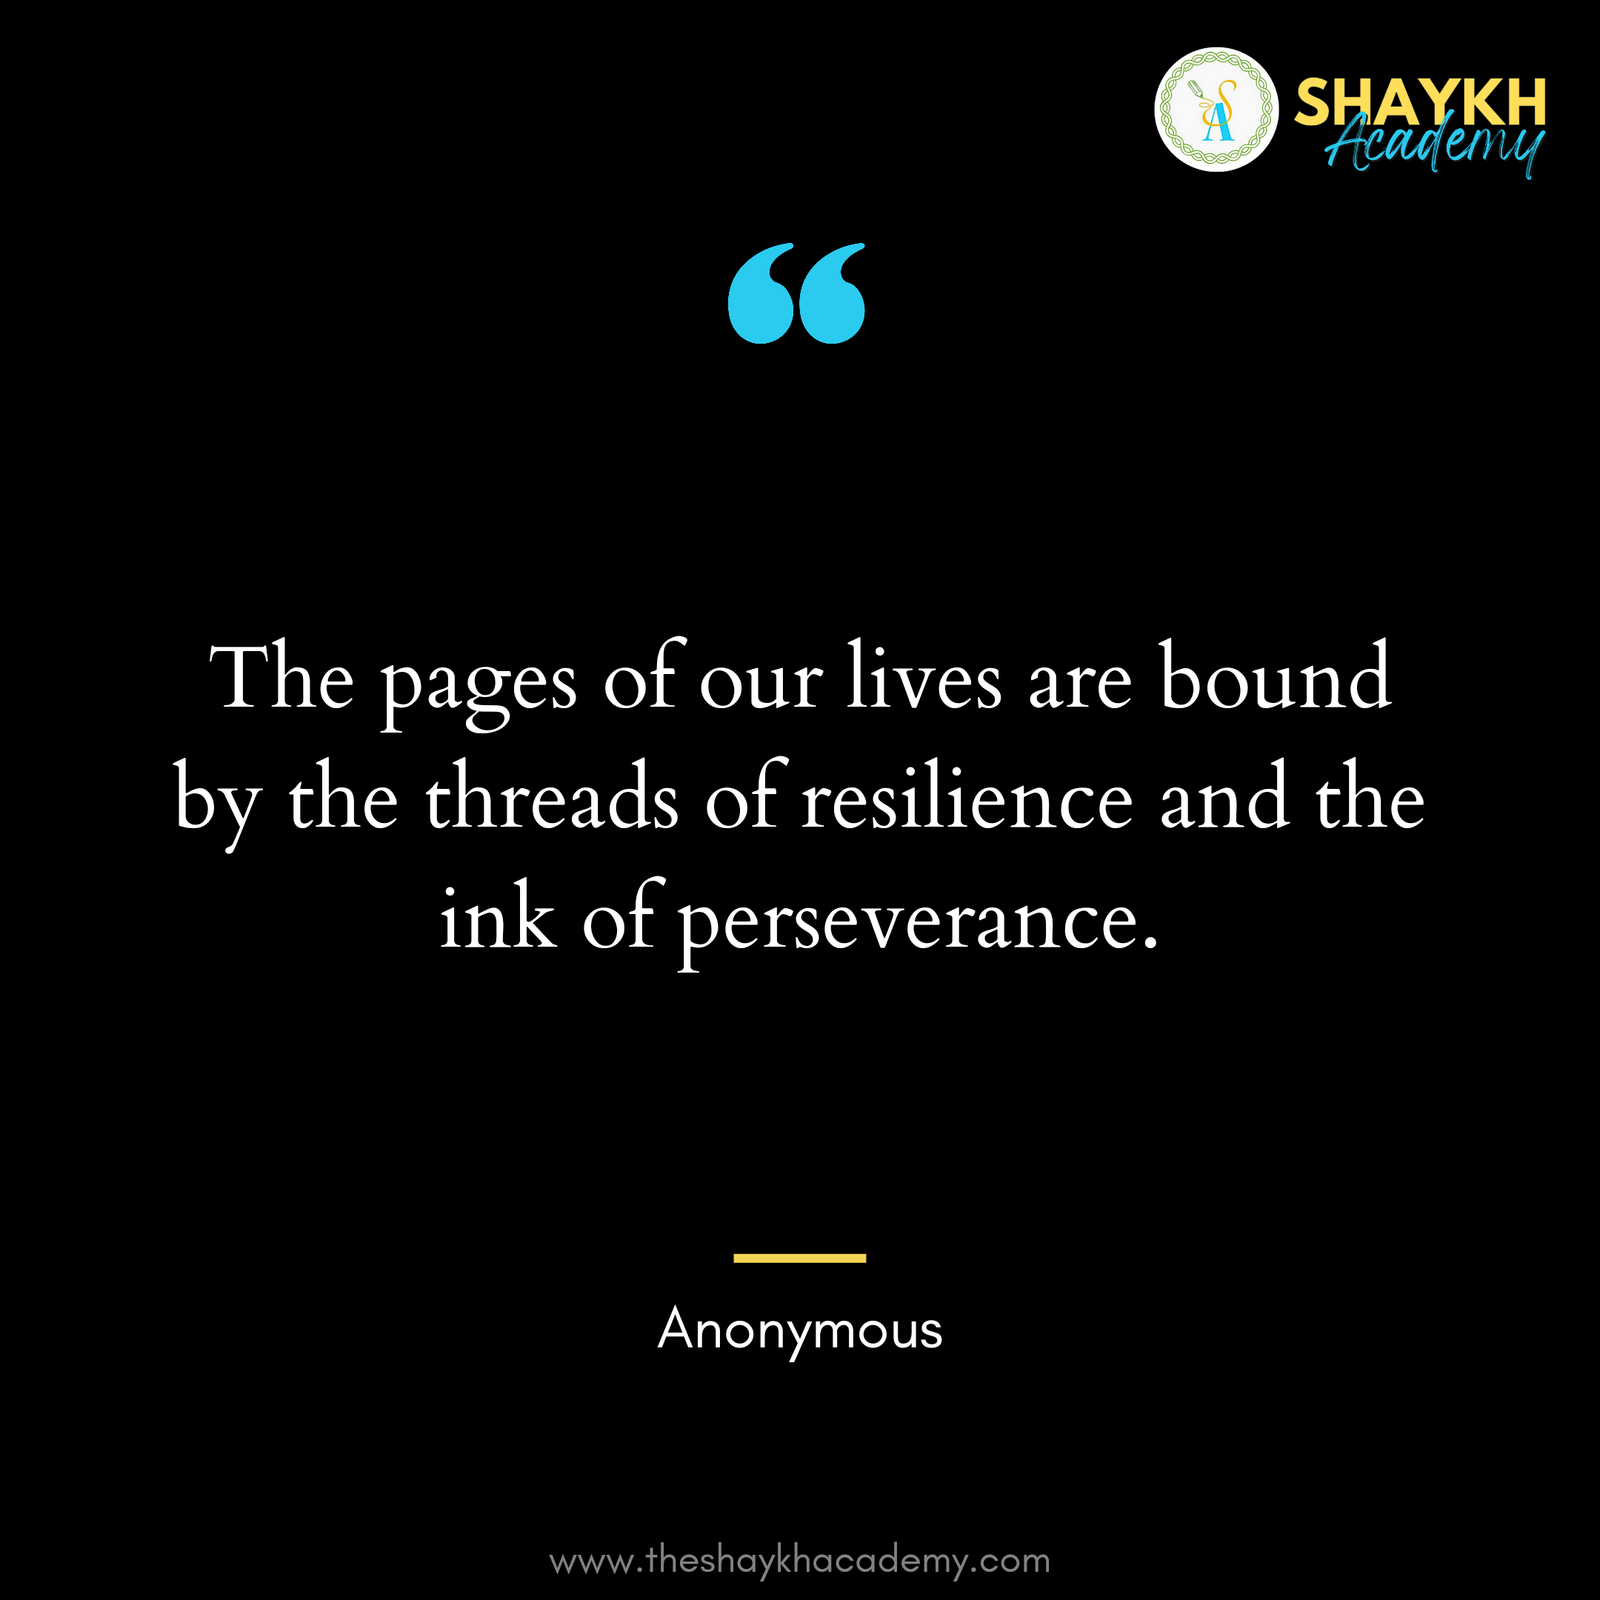 The pages of our lives are bound by the threads of resilience and the ink of perseverance.